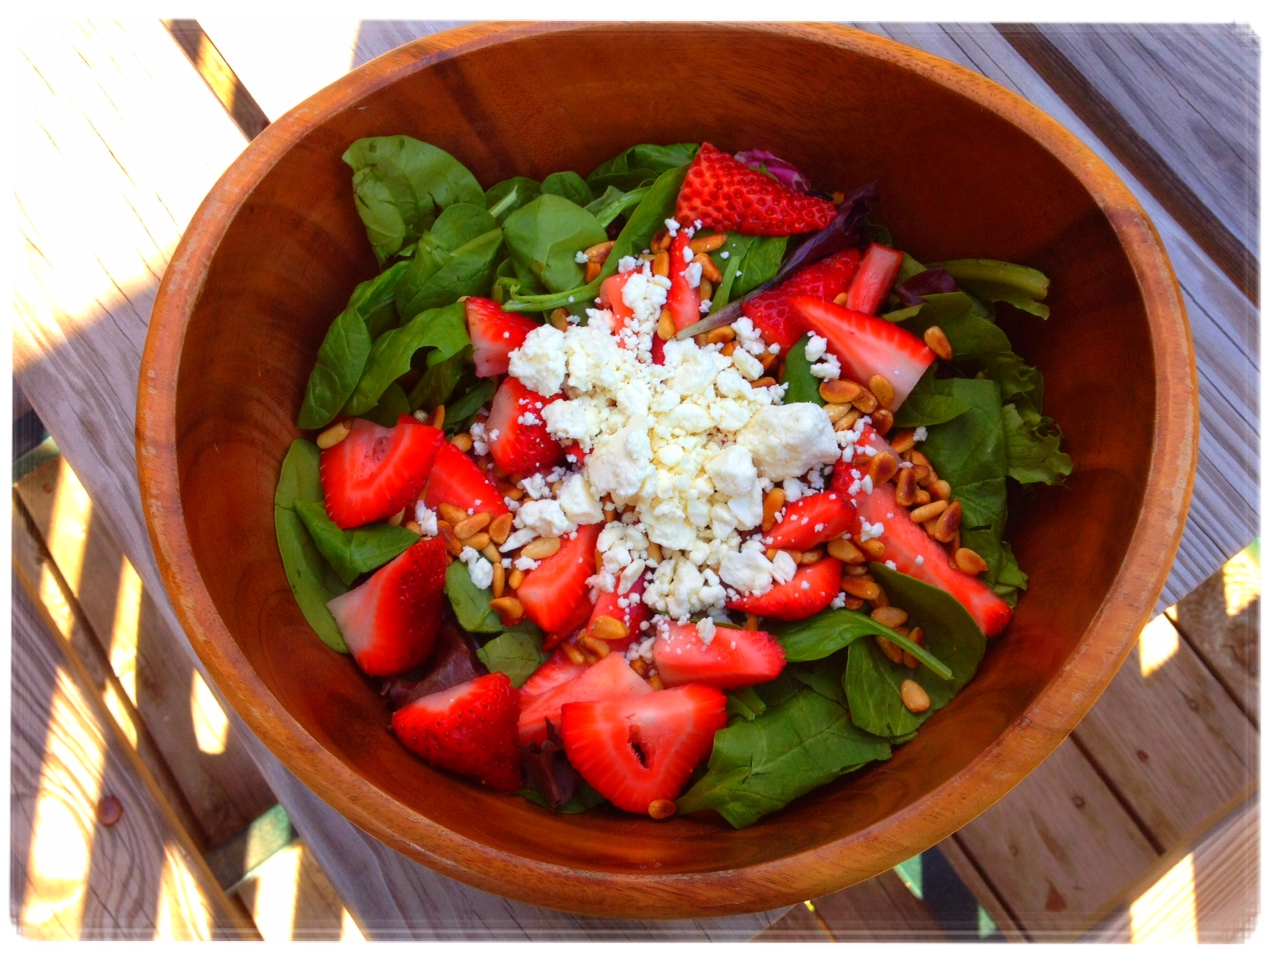 Strawberry Spinach Salad with Pine nuts and Feta